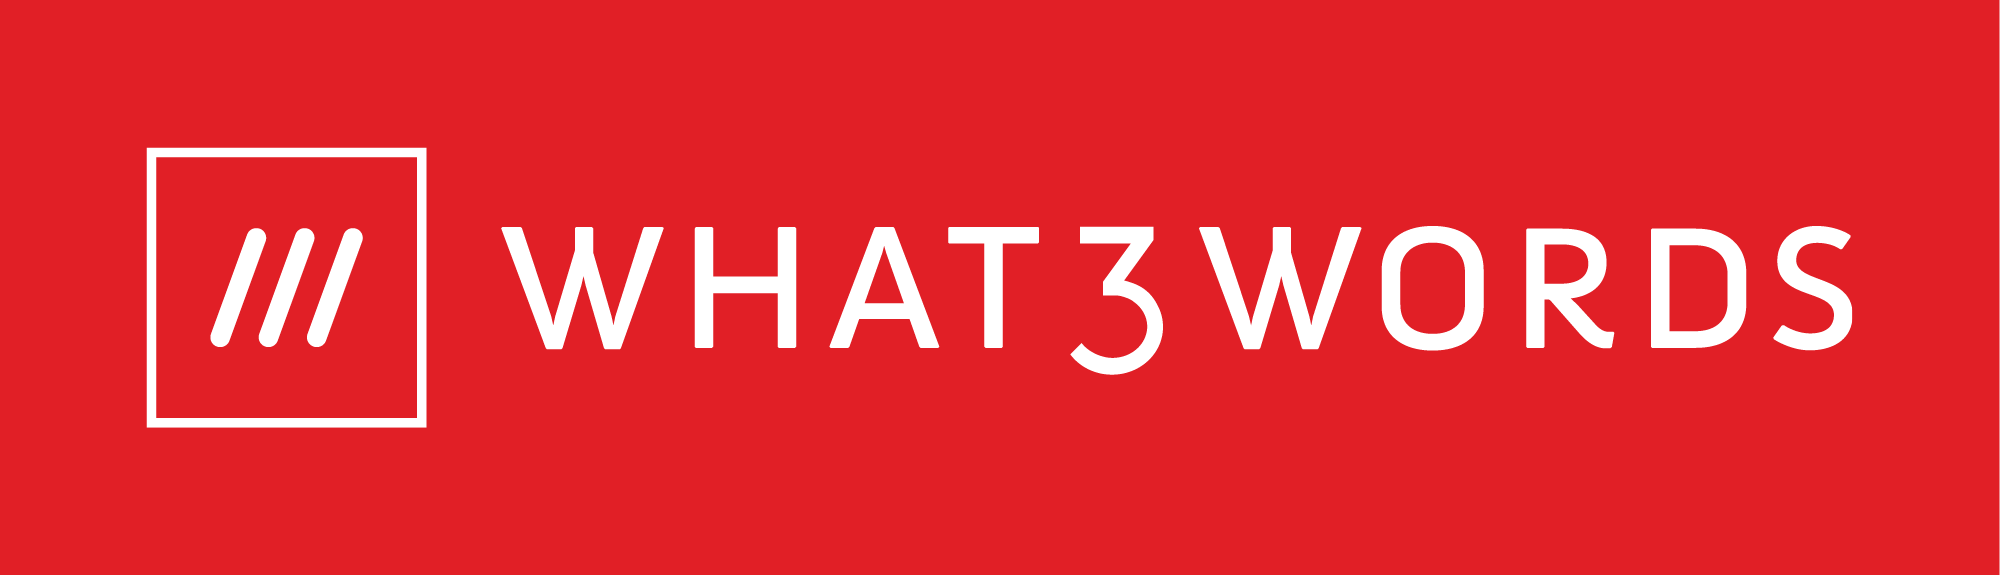 What is what3words and How Do I Use It? | TurfOnline